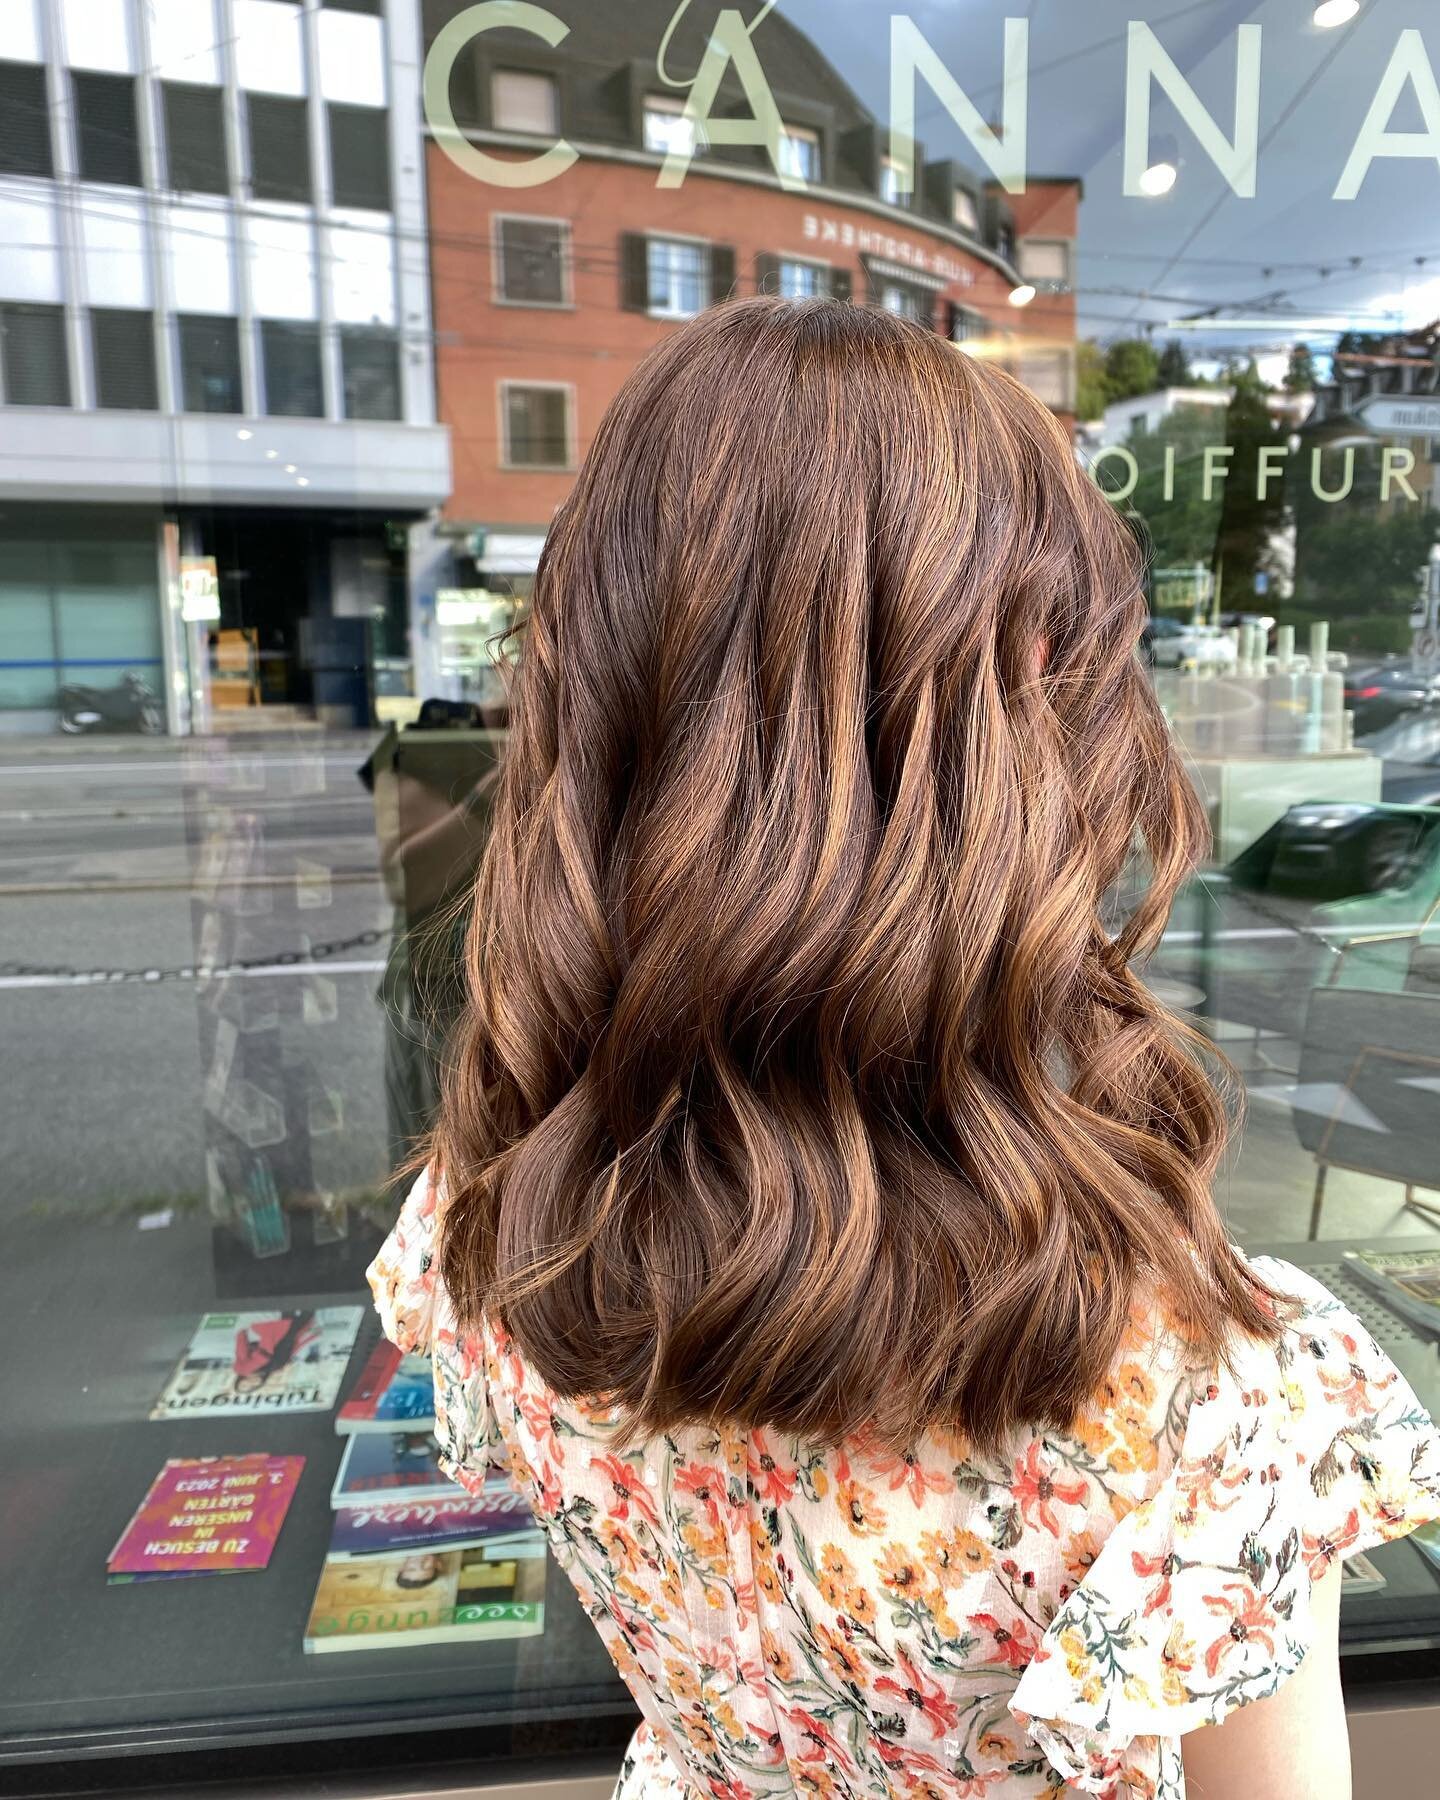 flash up balayage for your summer holiday vibes by brigitte #summervibes #balayage #highlighting #haircolors #beachwaves #healthyhair #hairgoals #hairstyles #instahair #hairaffair #hairsalon #schwarzkopf #alternahaircare #hairmakeover #hairstylistlif